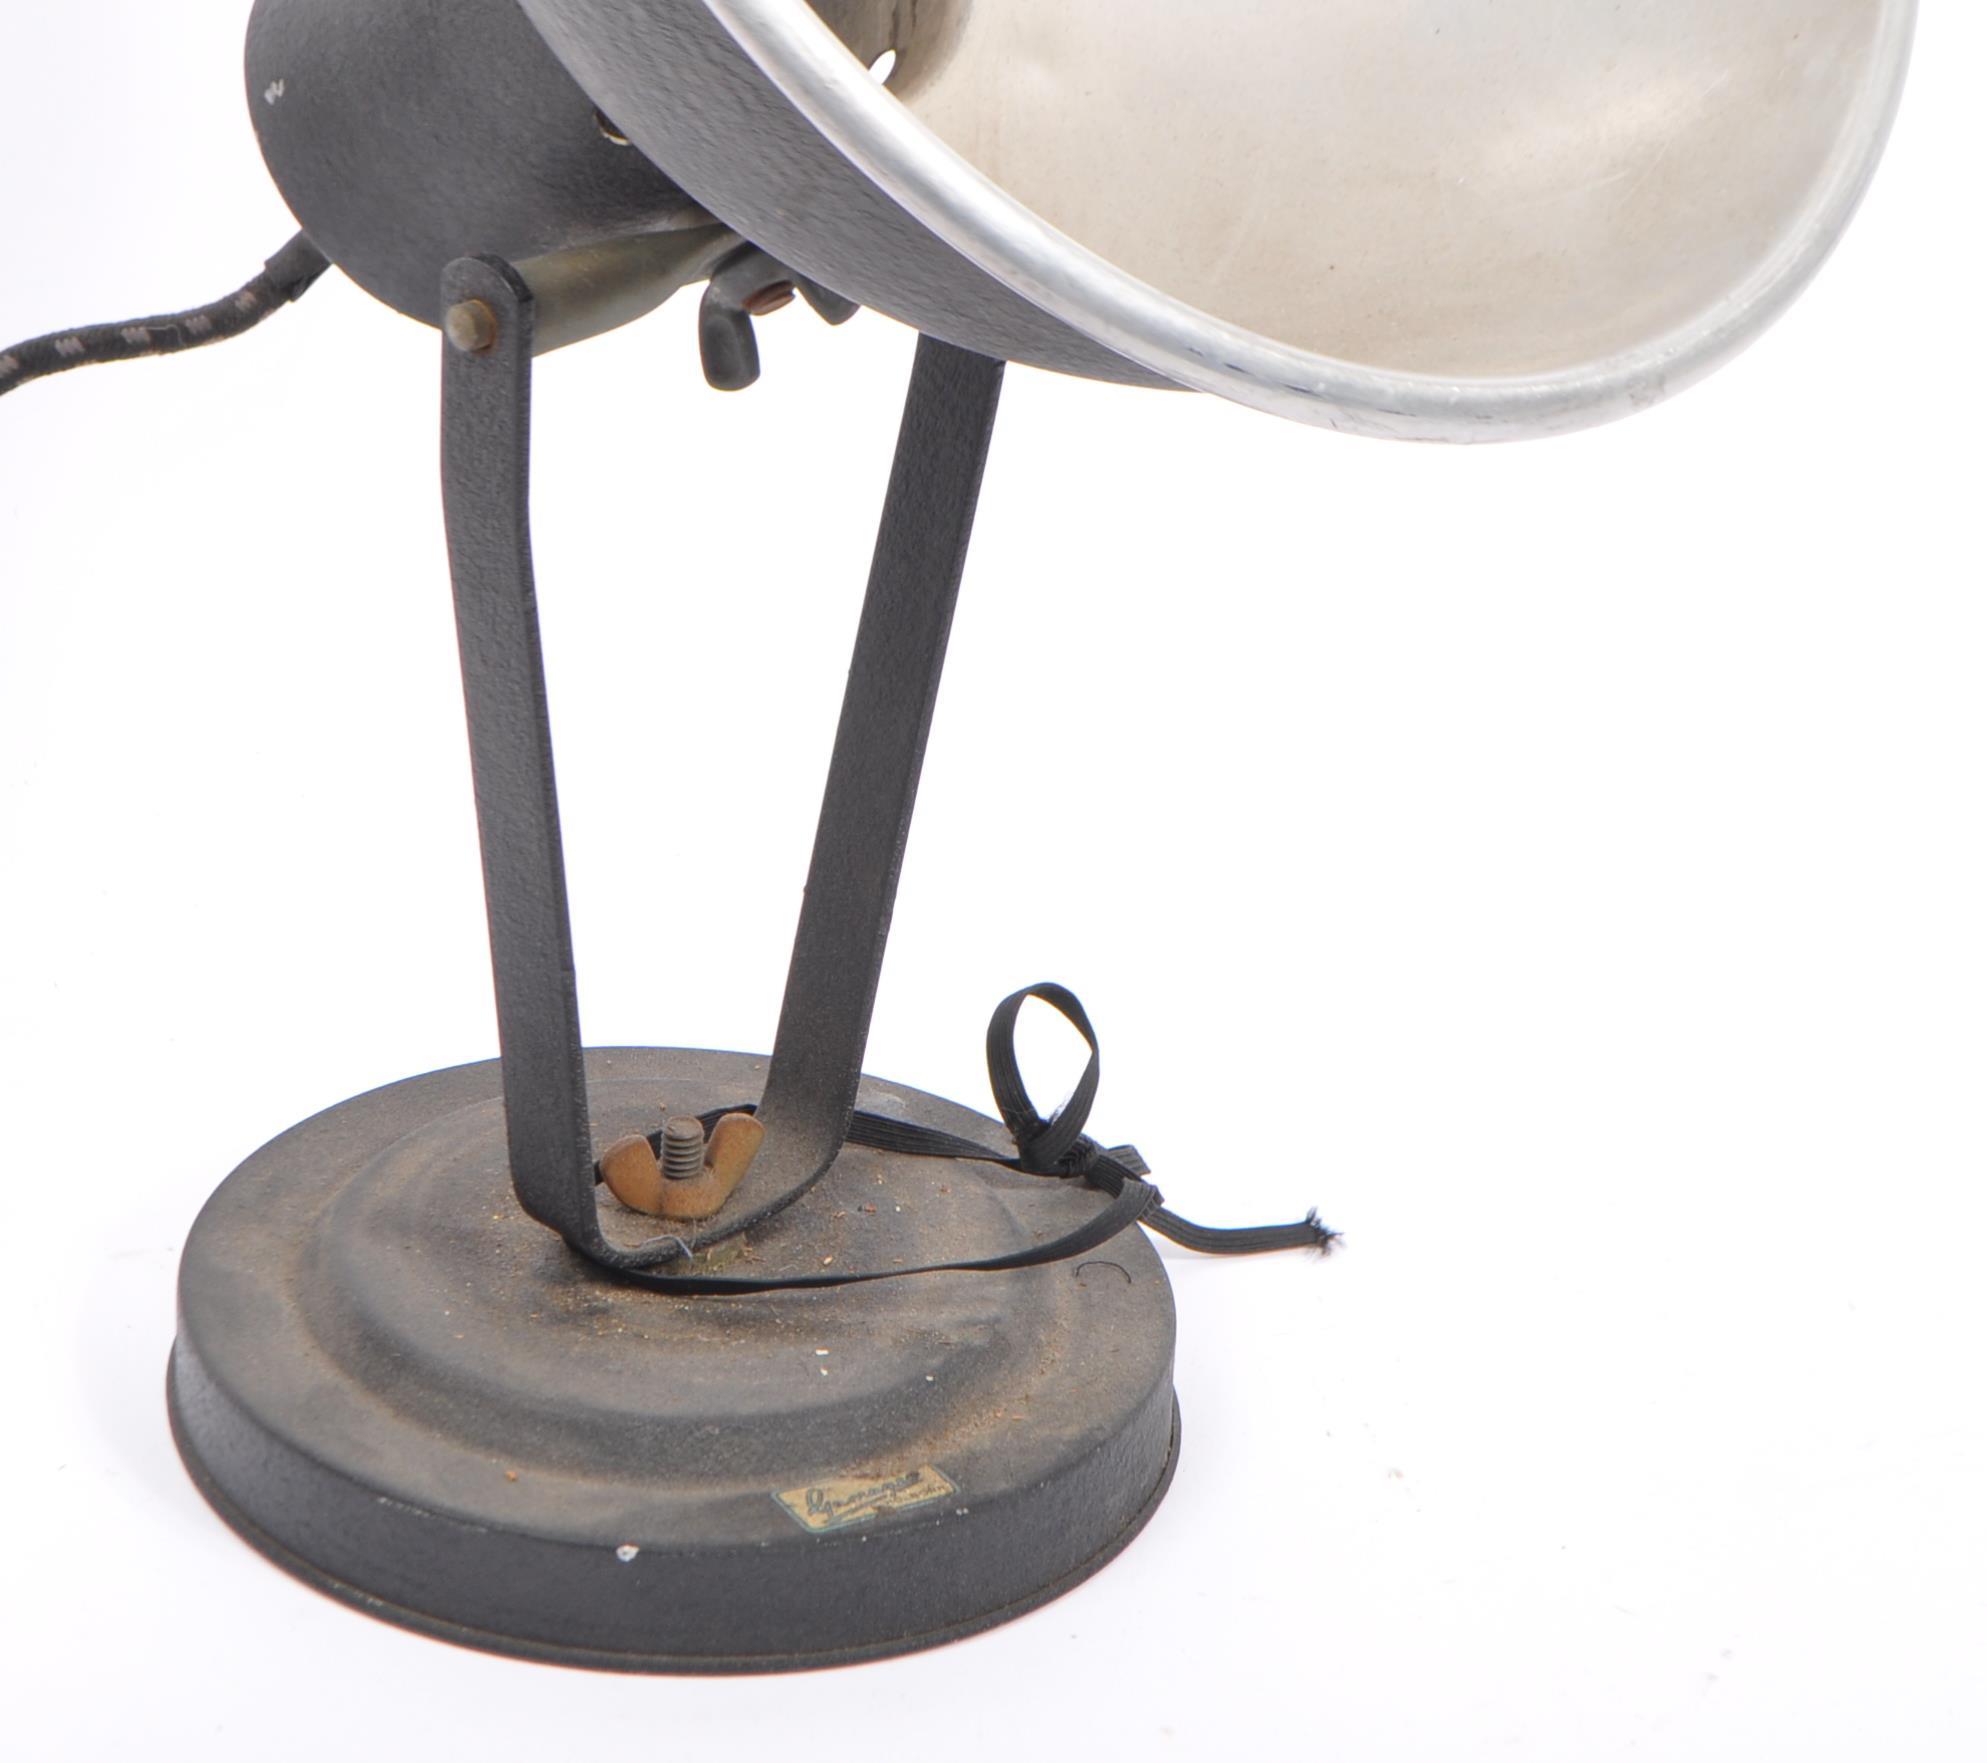 MID 20TH CENTURY INDUSTRIAL DESK LAMP LIGHT BY GAMAGES HOLBORN - Image 3 of 4